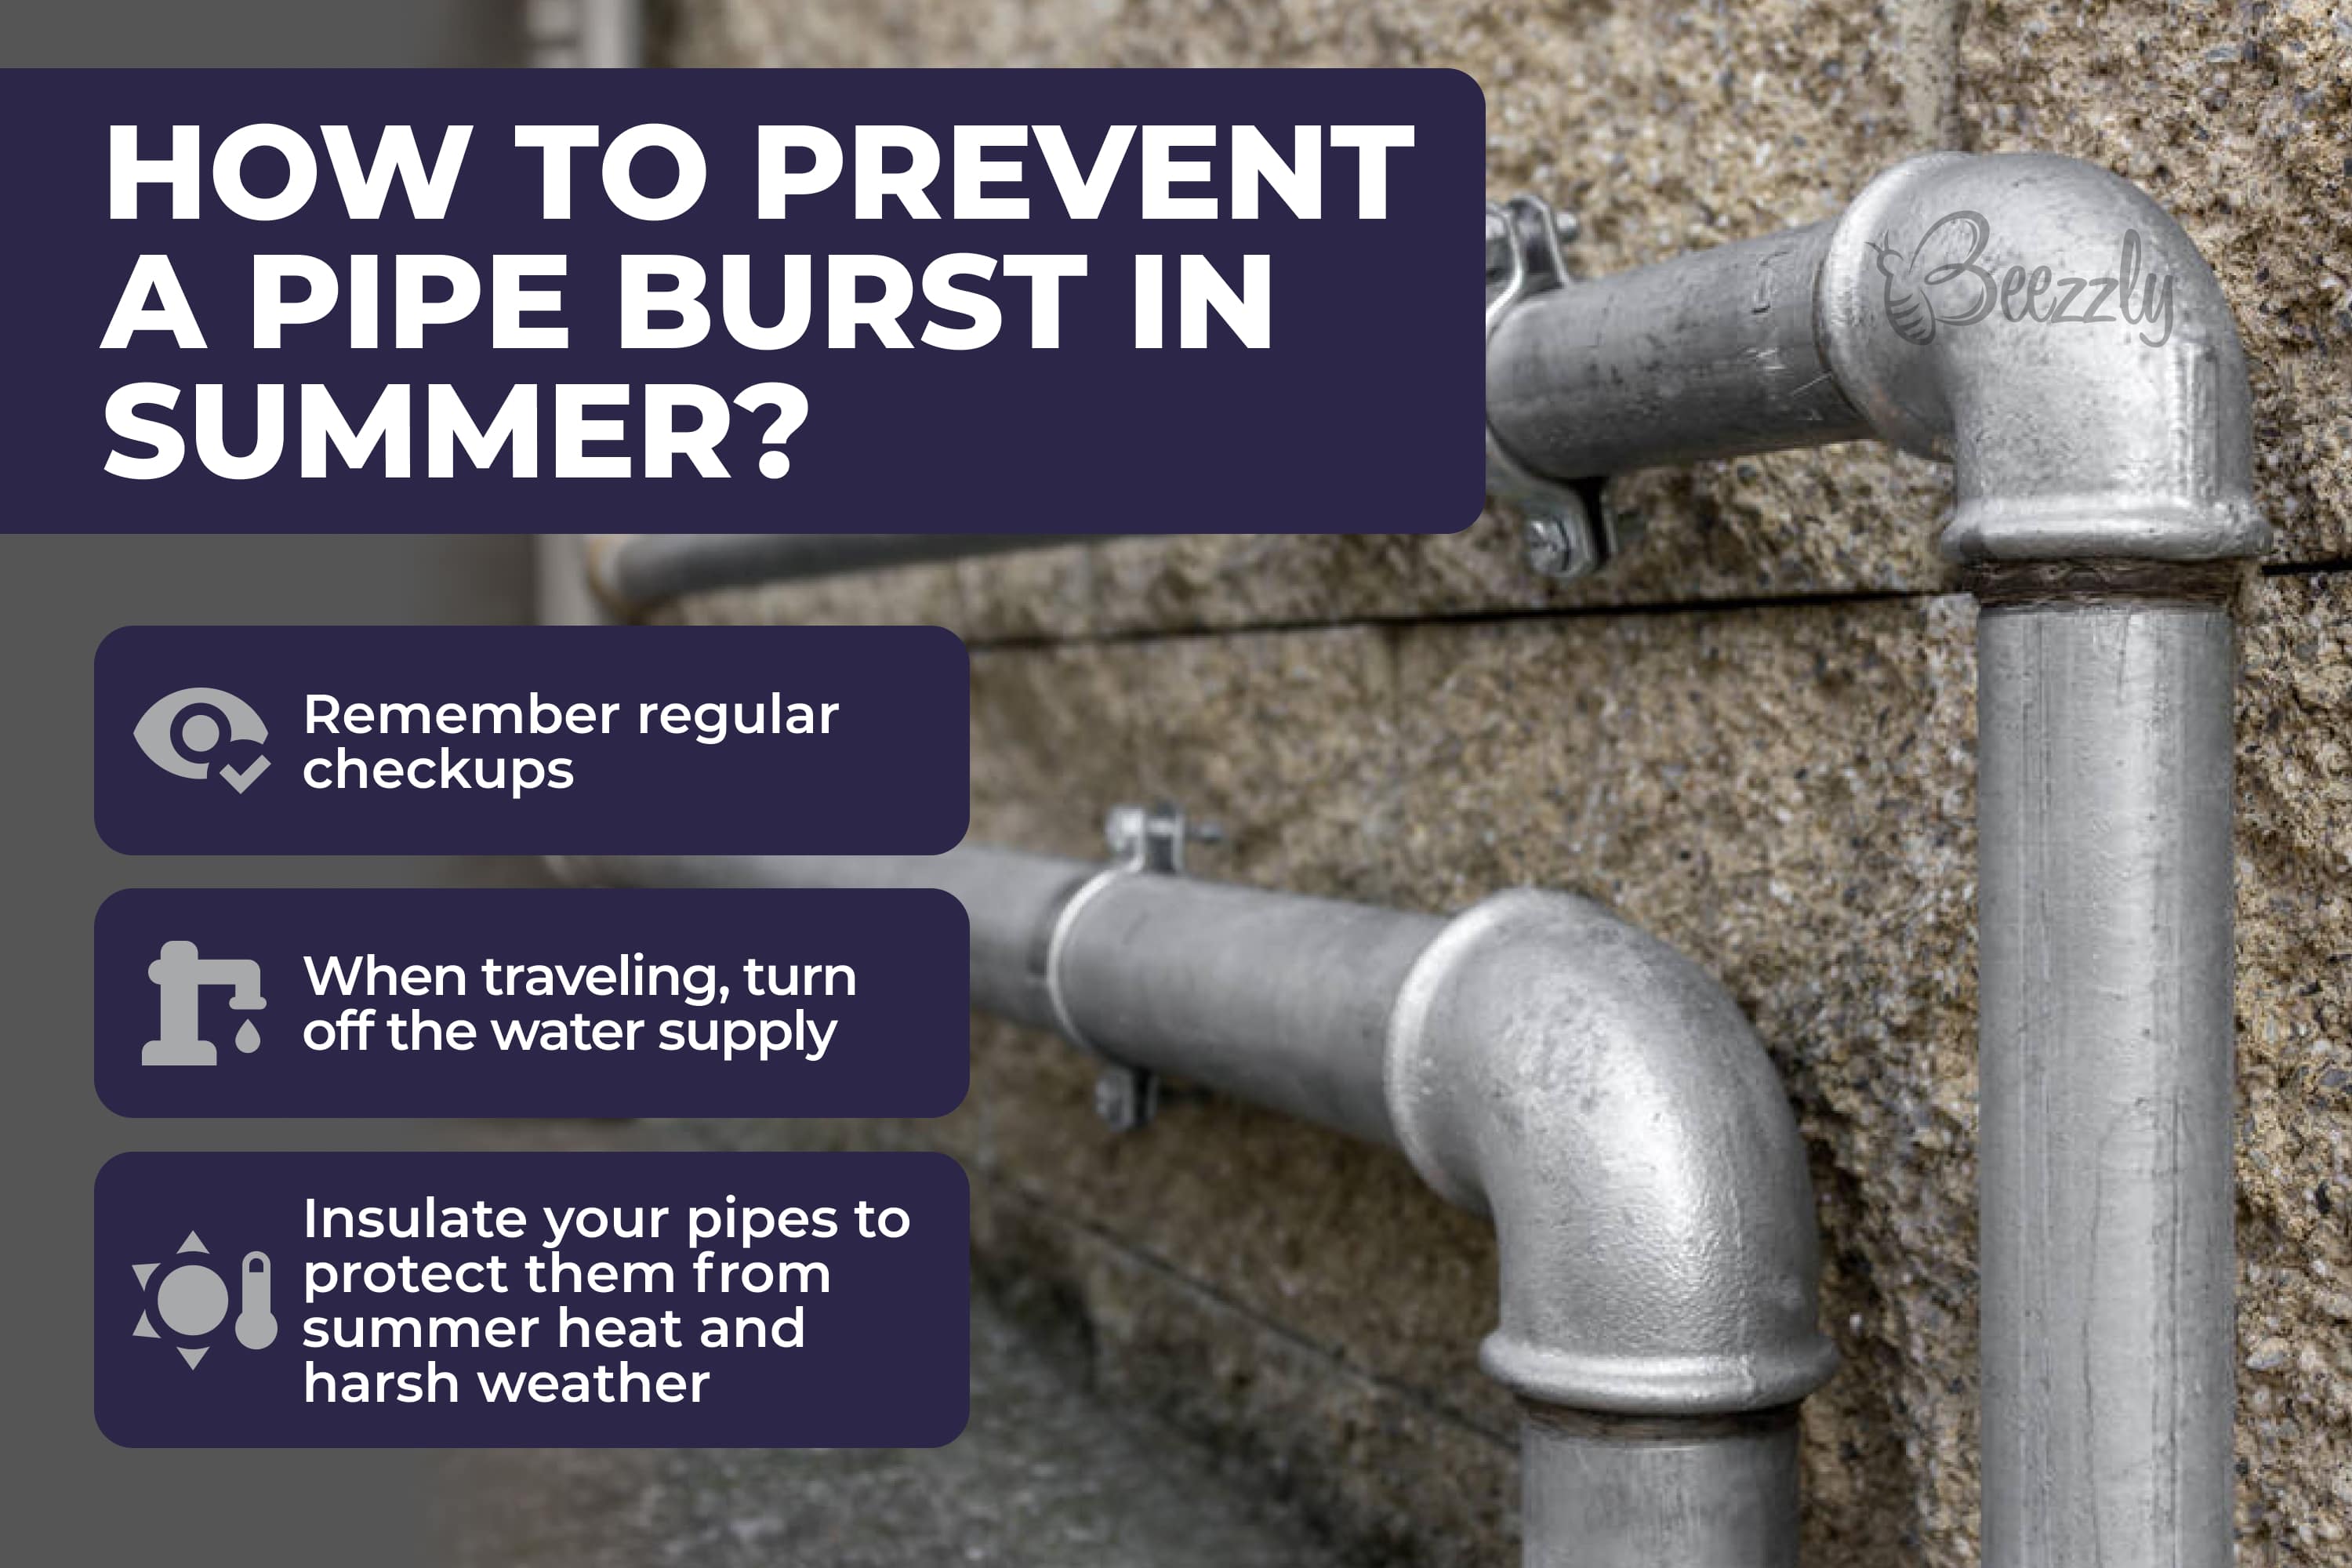 How to prevent a pipe burst in summer